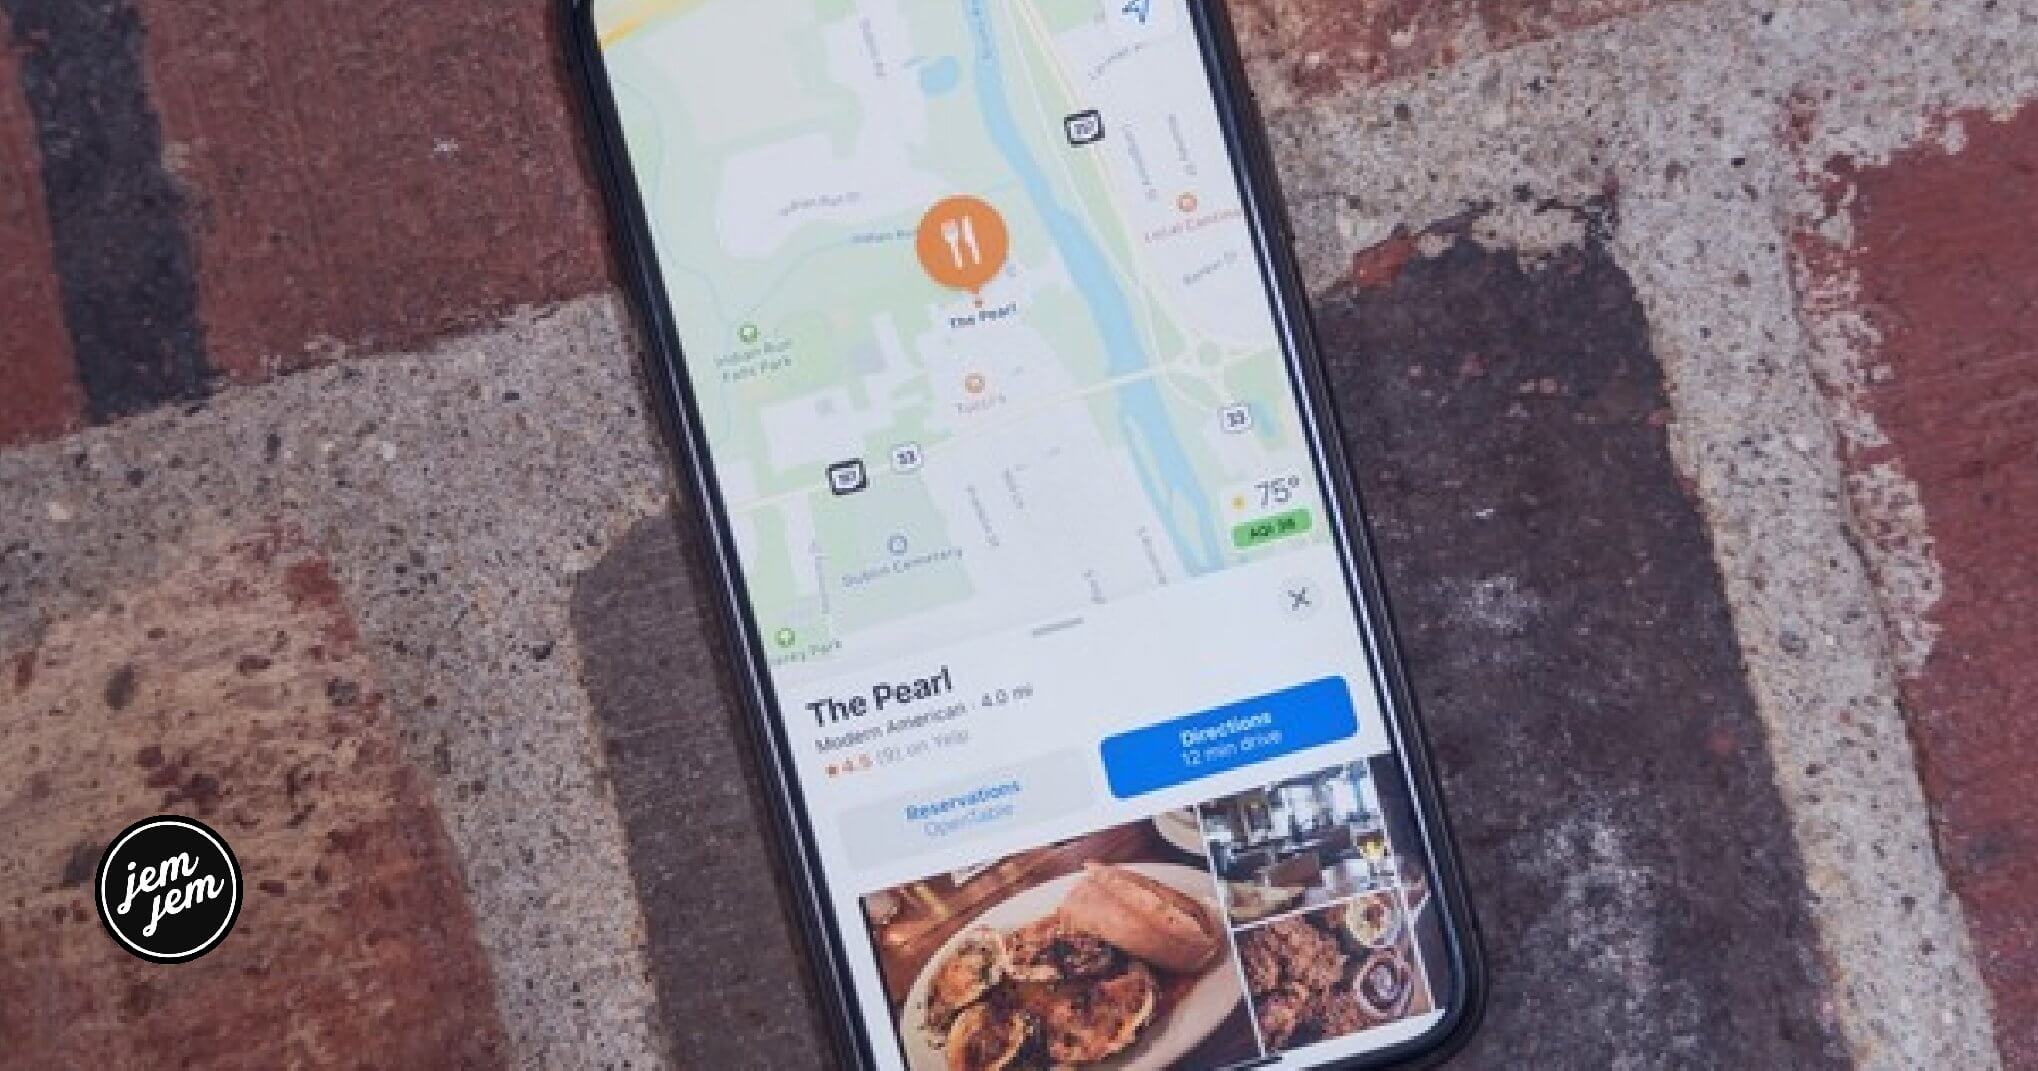 These are the booking apps you can use with Apple Maps